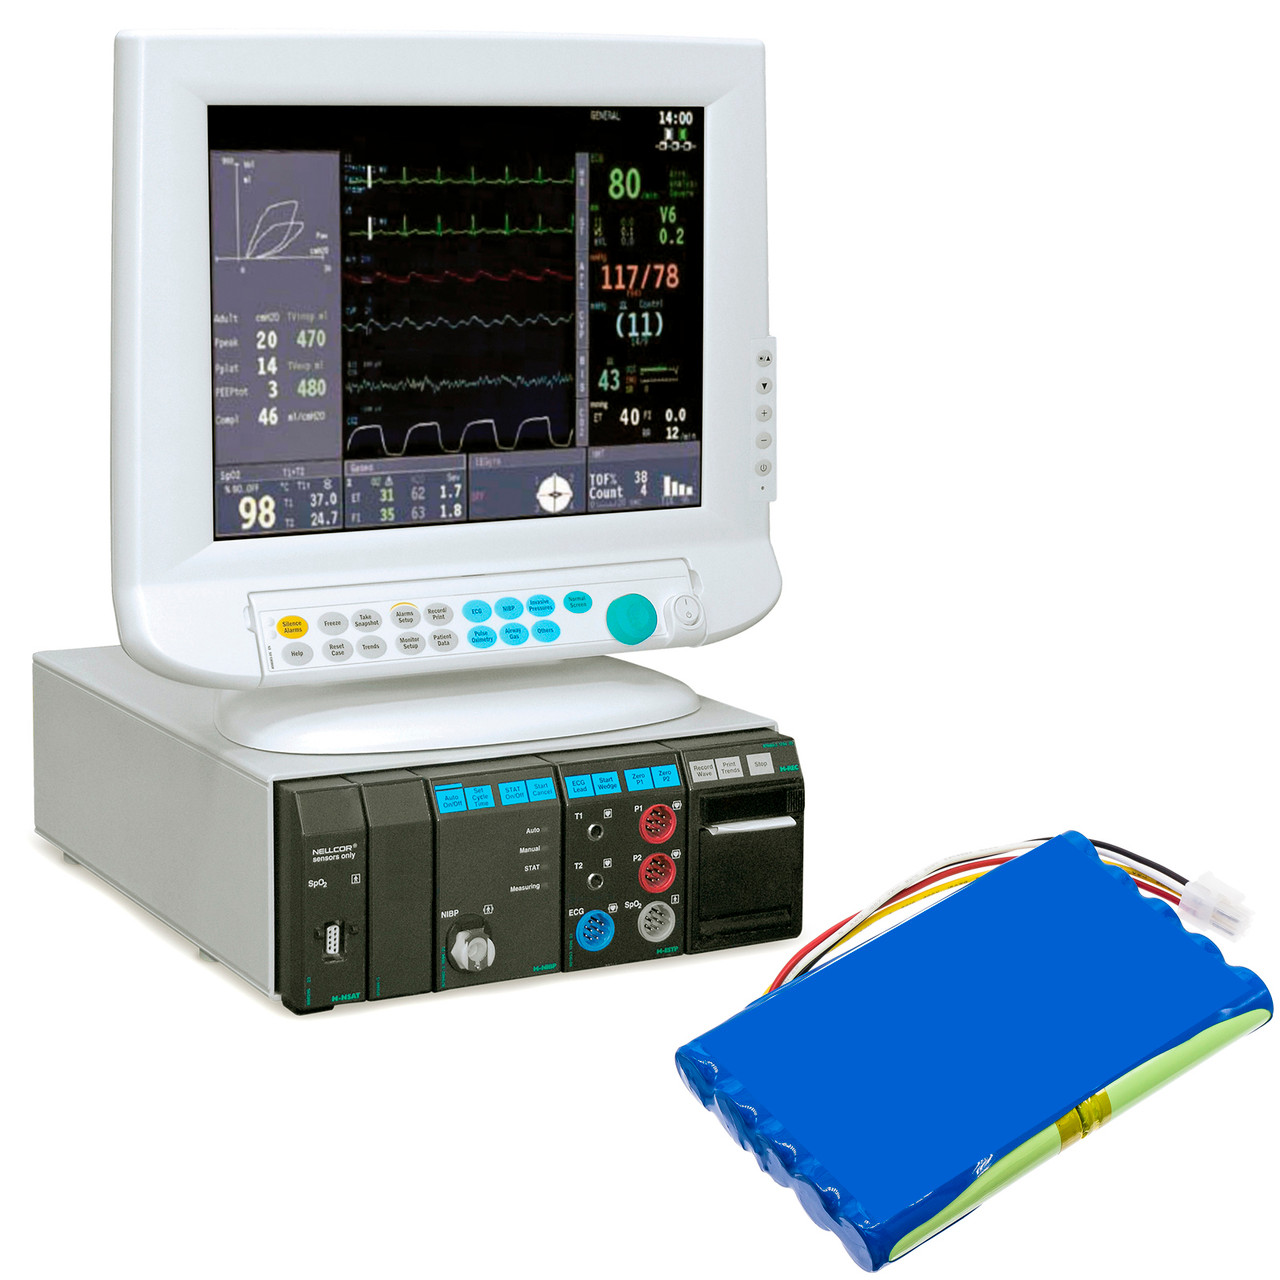 Datex-Ohmeda S/5 Patient Monitor Battery